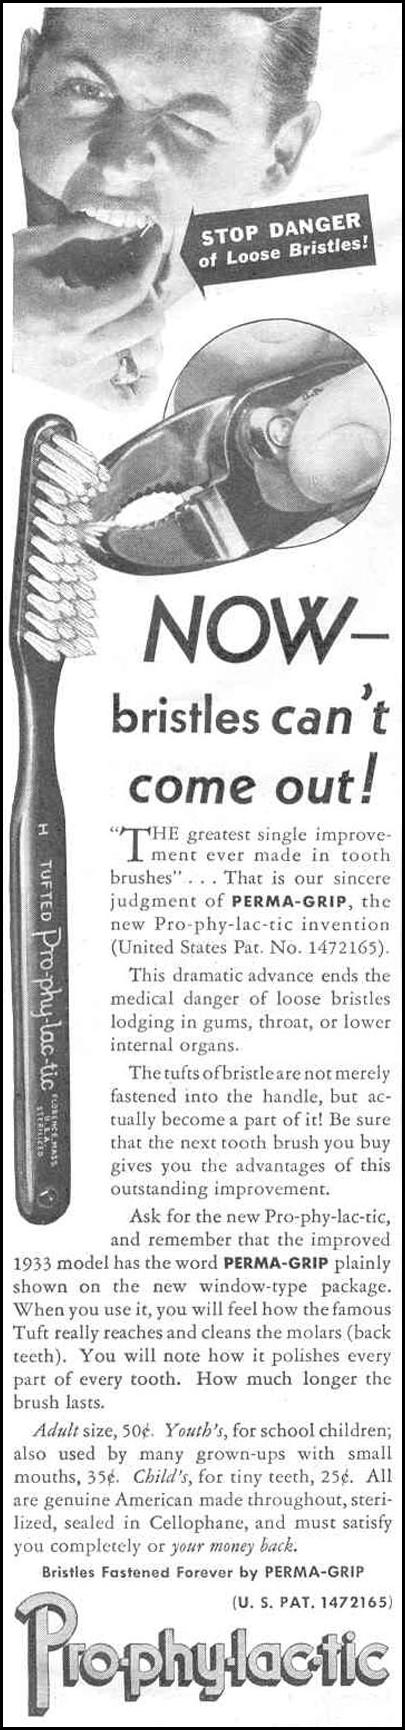 PRO-PHY-LAC-TIC TOOTHBRUSH
GOOD HOUSEKEEPING
06/01/1933
p. 96